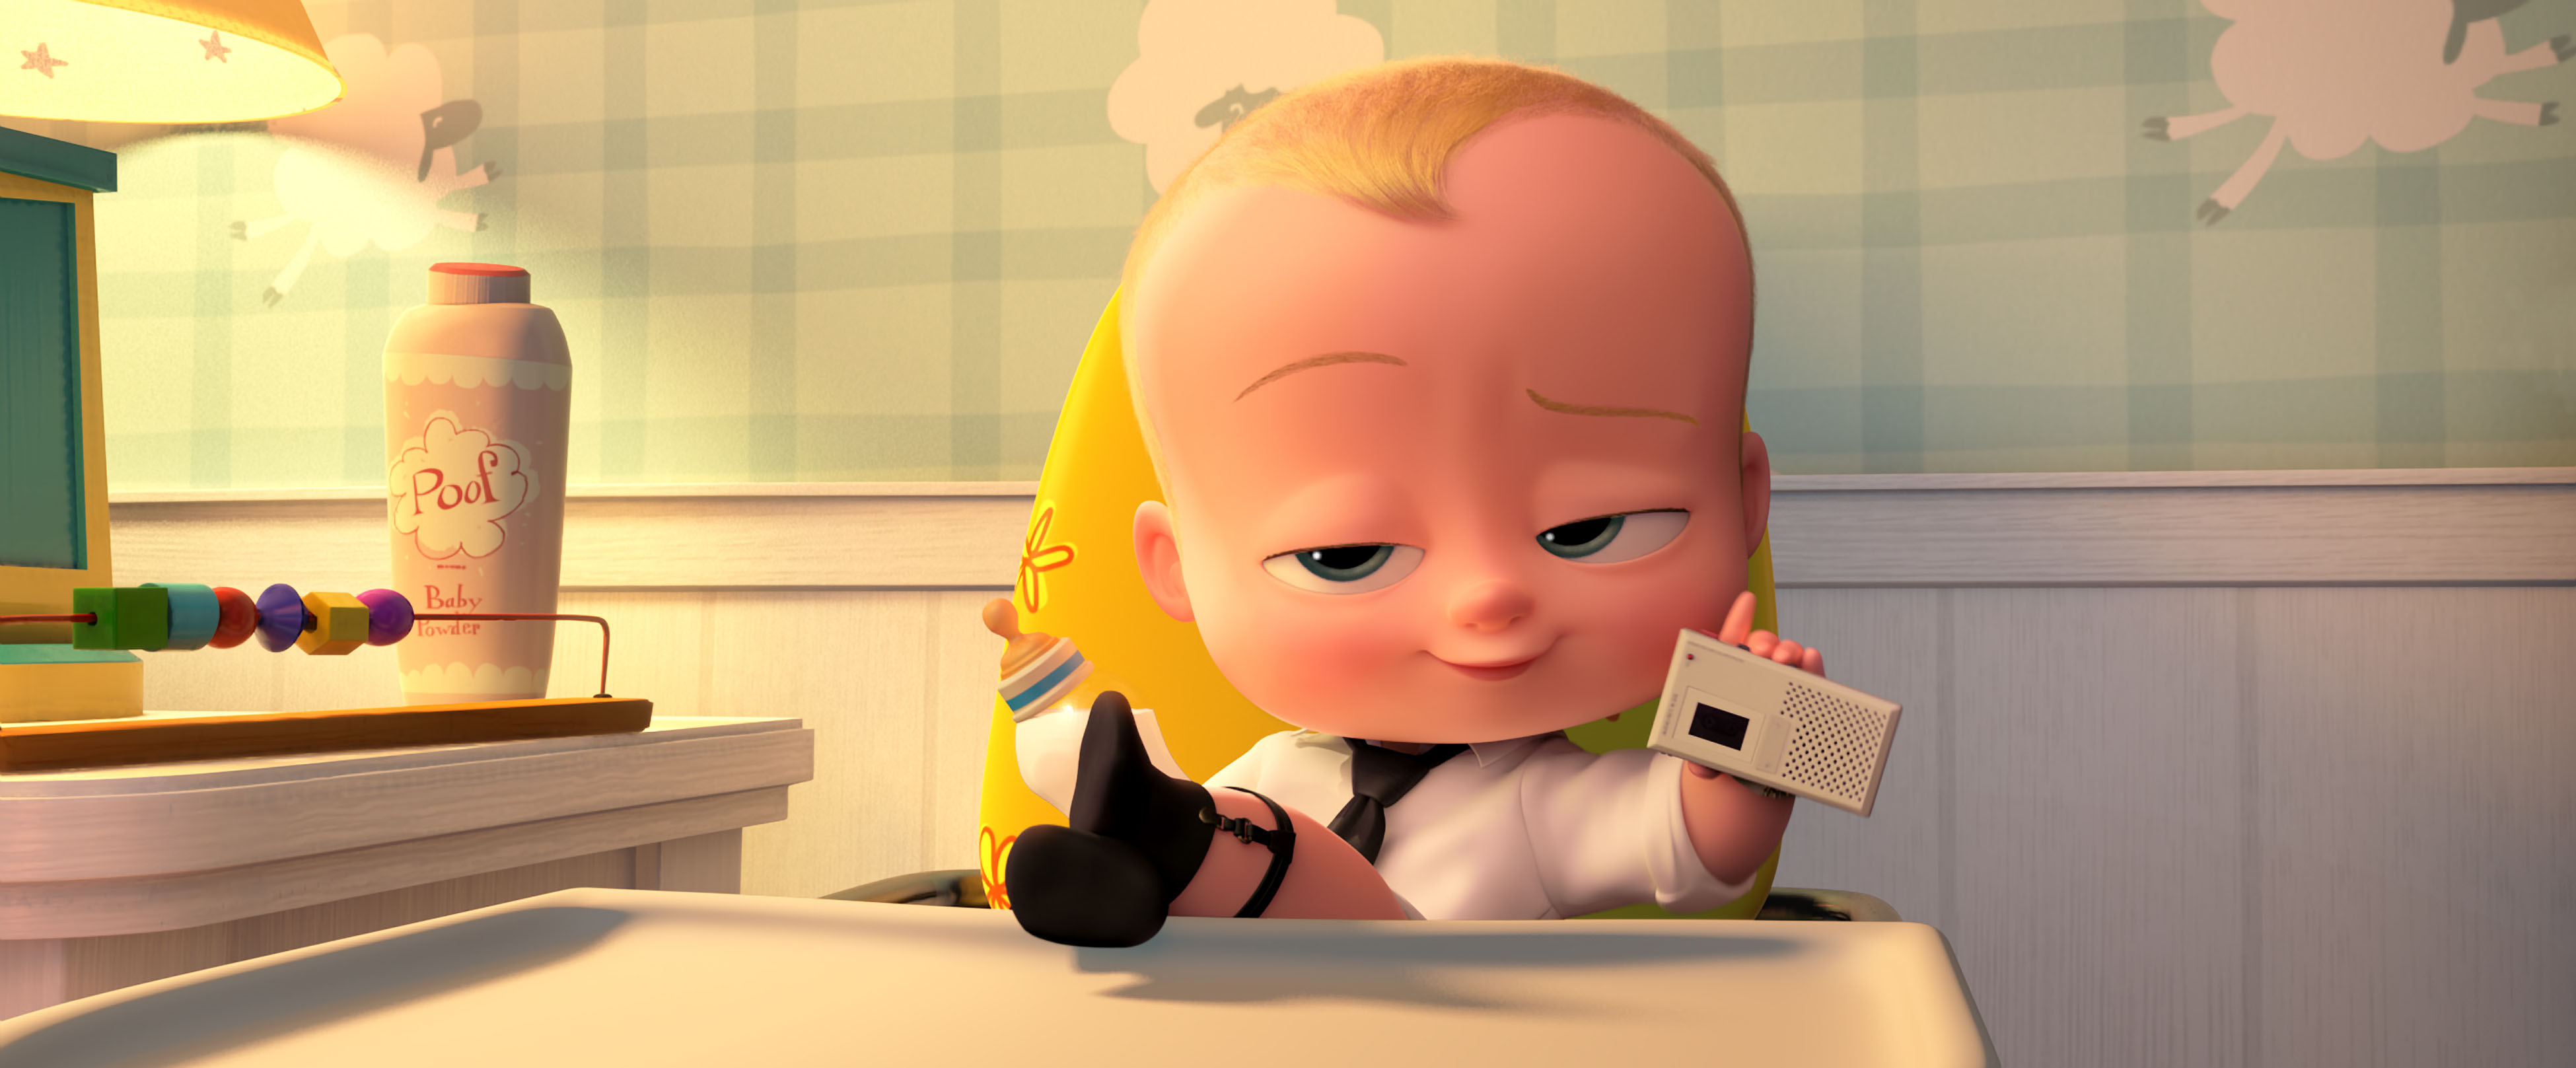 The Boss Baby HD Wallpaper | Background Image | 3900x1617 ...